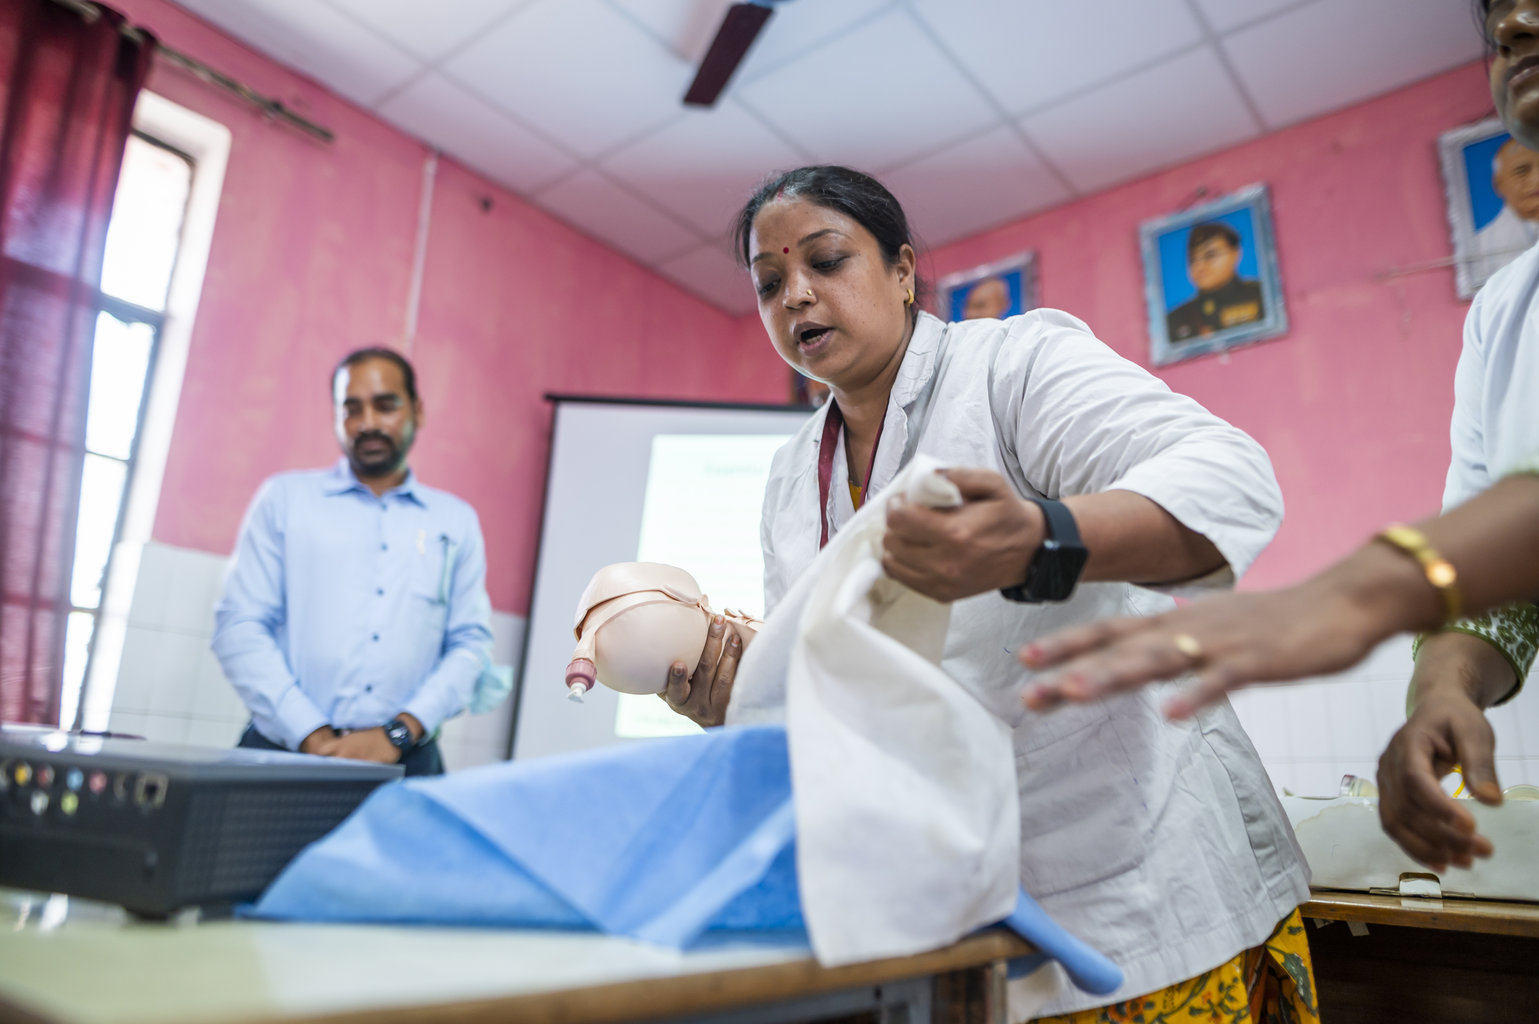 A healthcare worker demonstrates newborn care at a training session in a hospital.